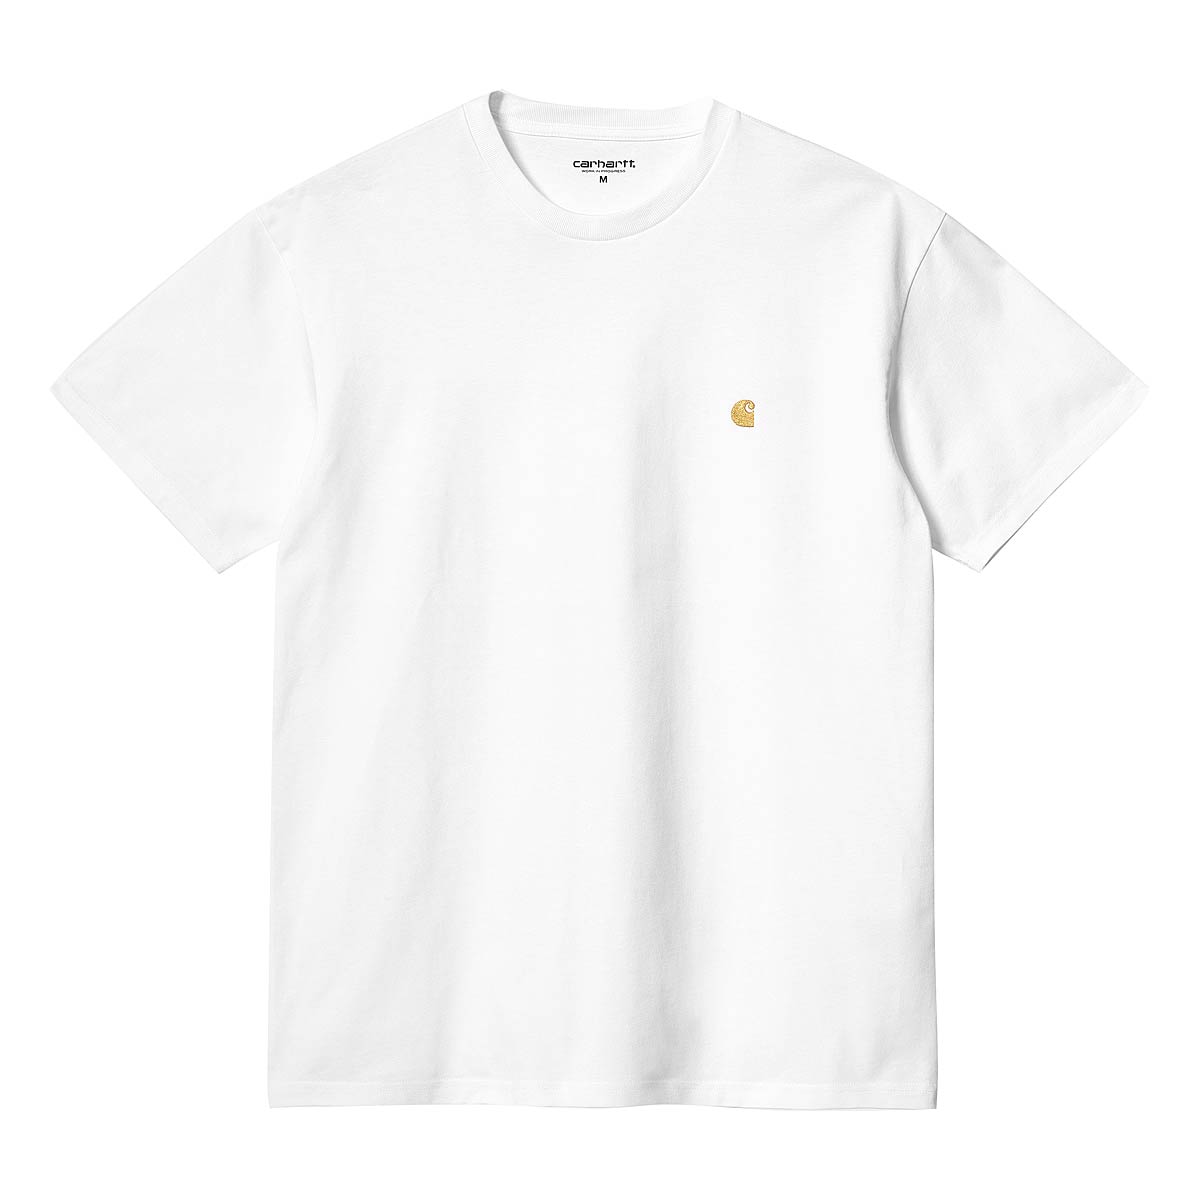 Carhartt Wip Chase T-shirt, White / Gold product